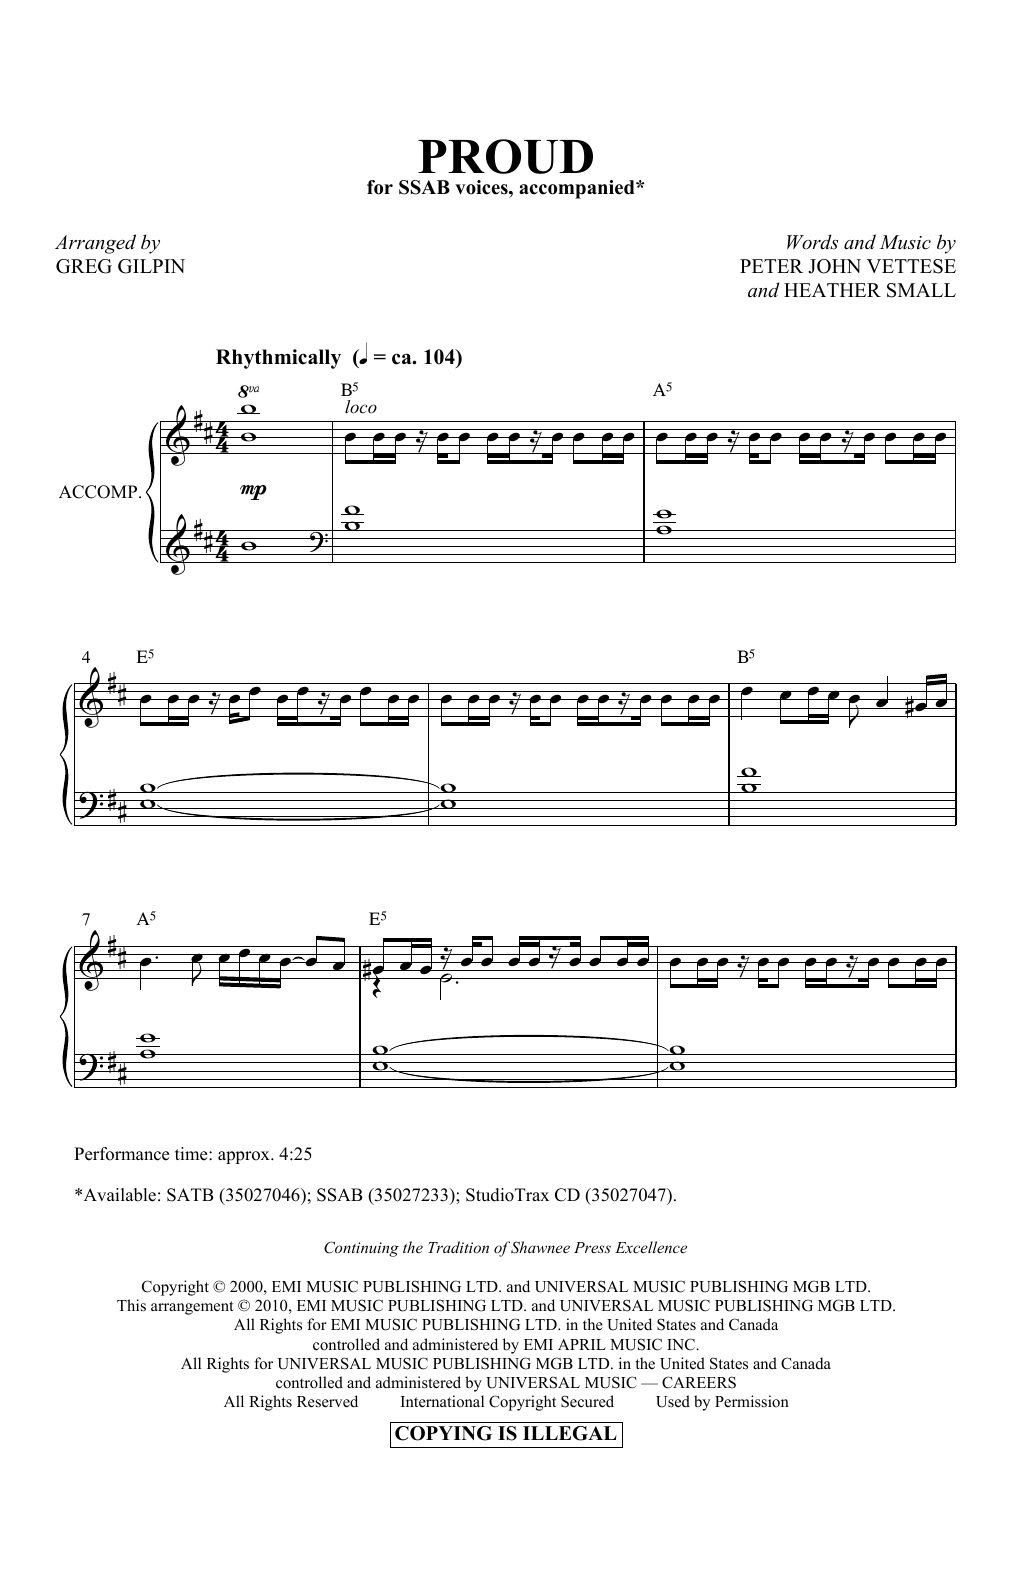 Download Peter Vettese and Heather Small Proud (arr. Greg Gilpin) Sheet Music